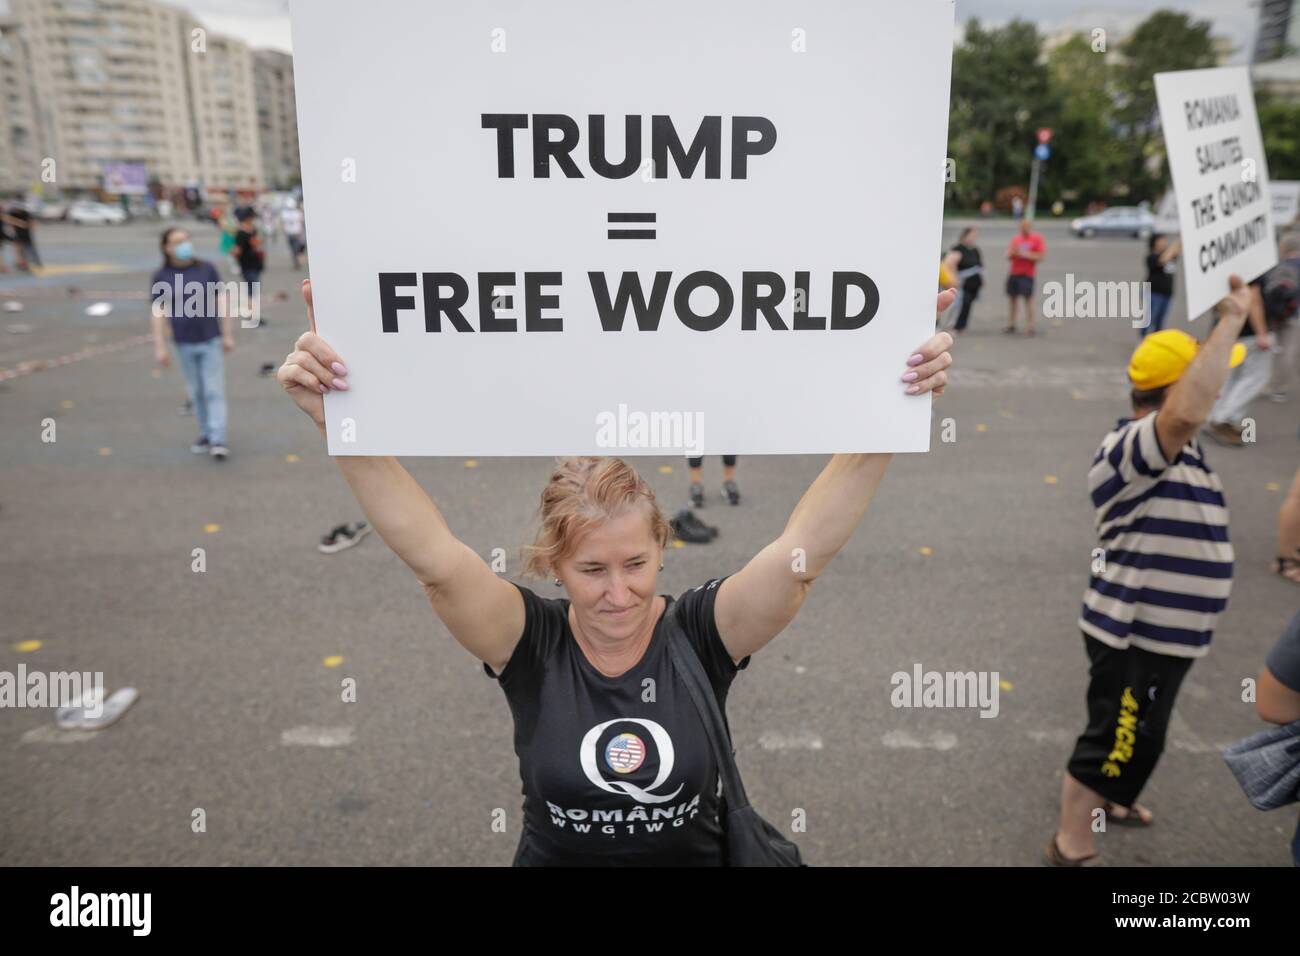 Bucharest, Romania - August 10, 2020: People display Qanon messages on cardboards during a political rally. Stock Photo